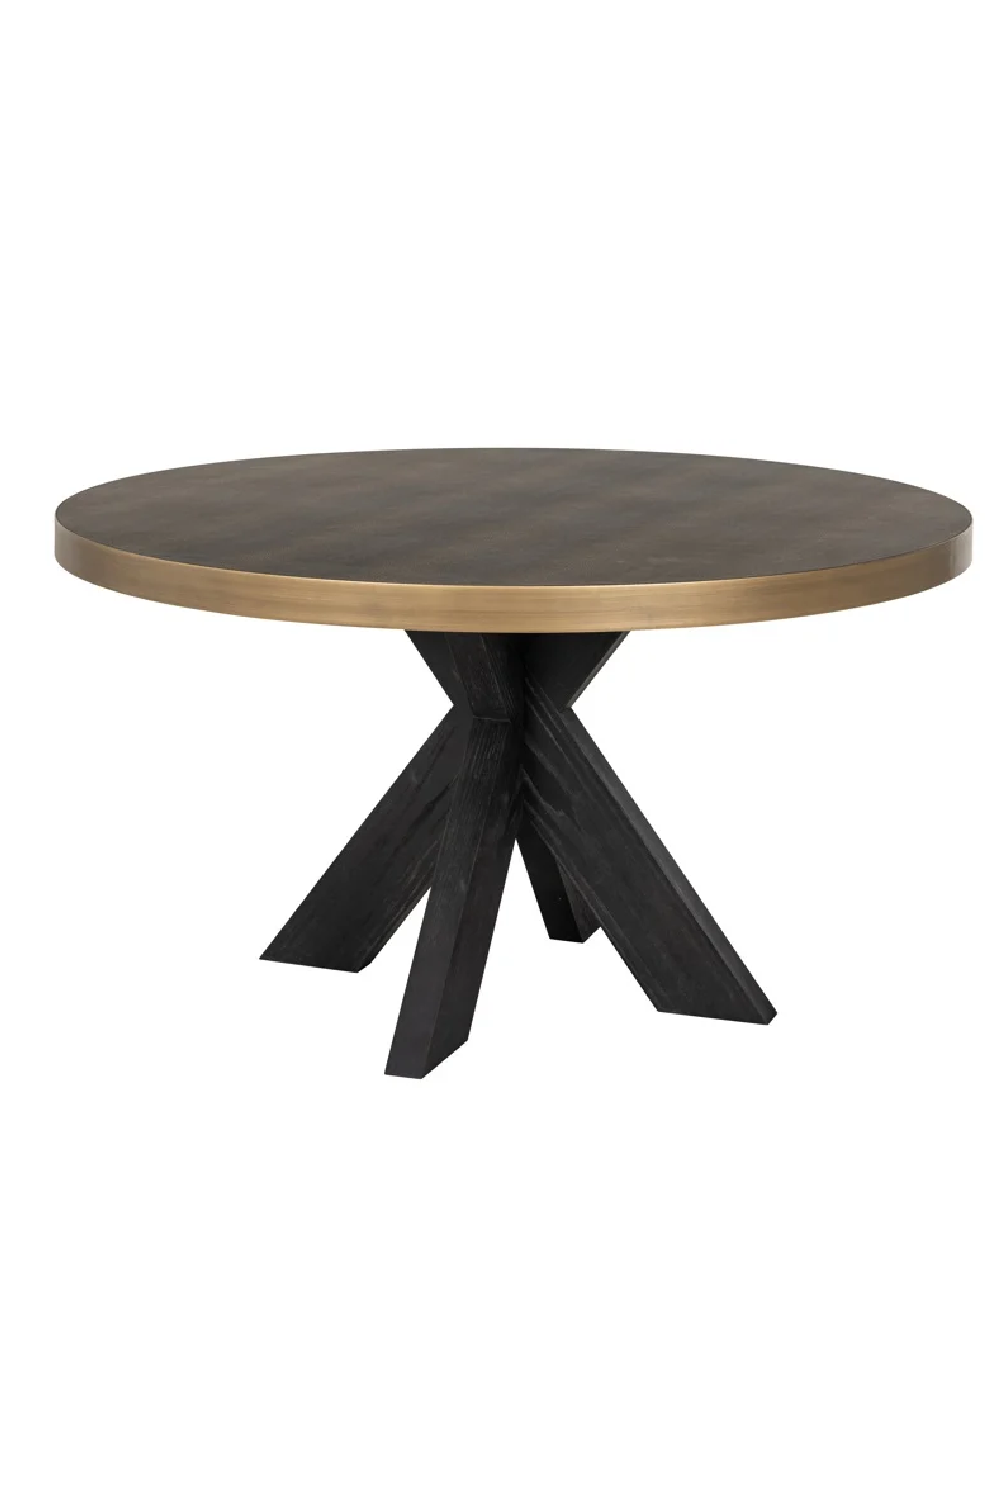 Leather Round Dining Table | OROA Bloomville | Oroa.com